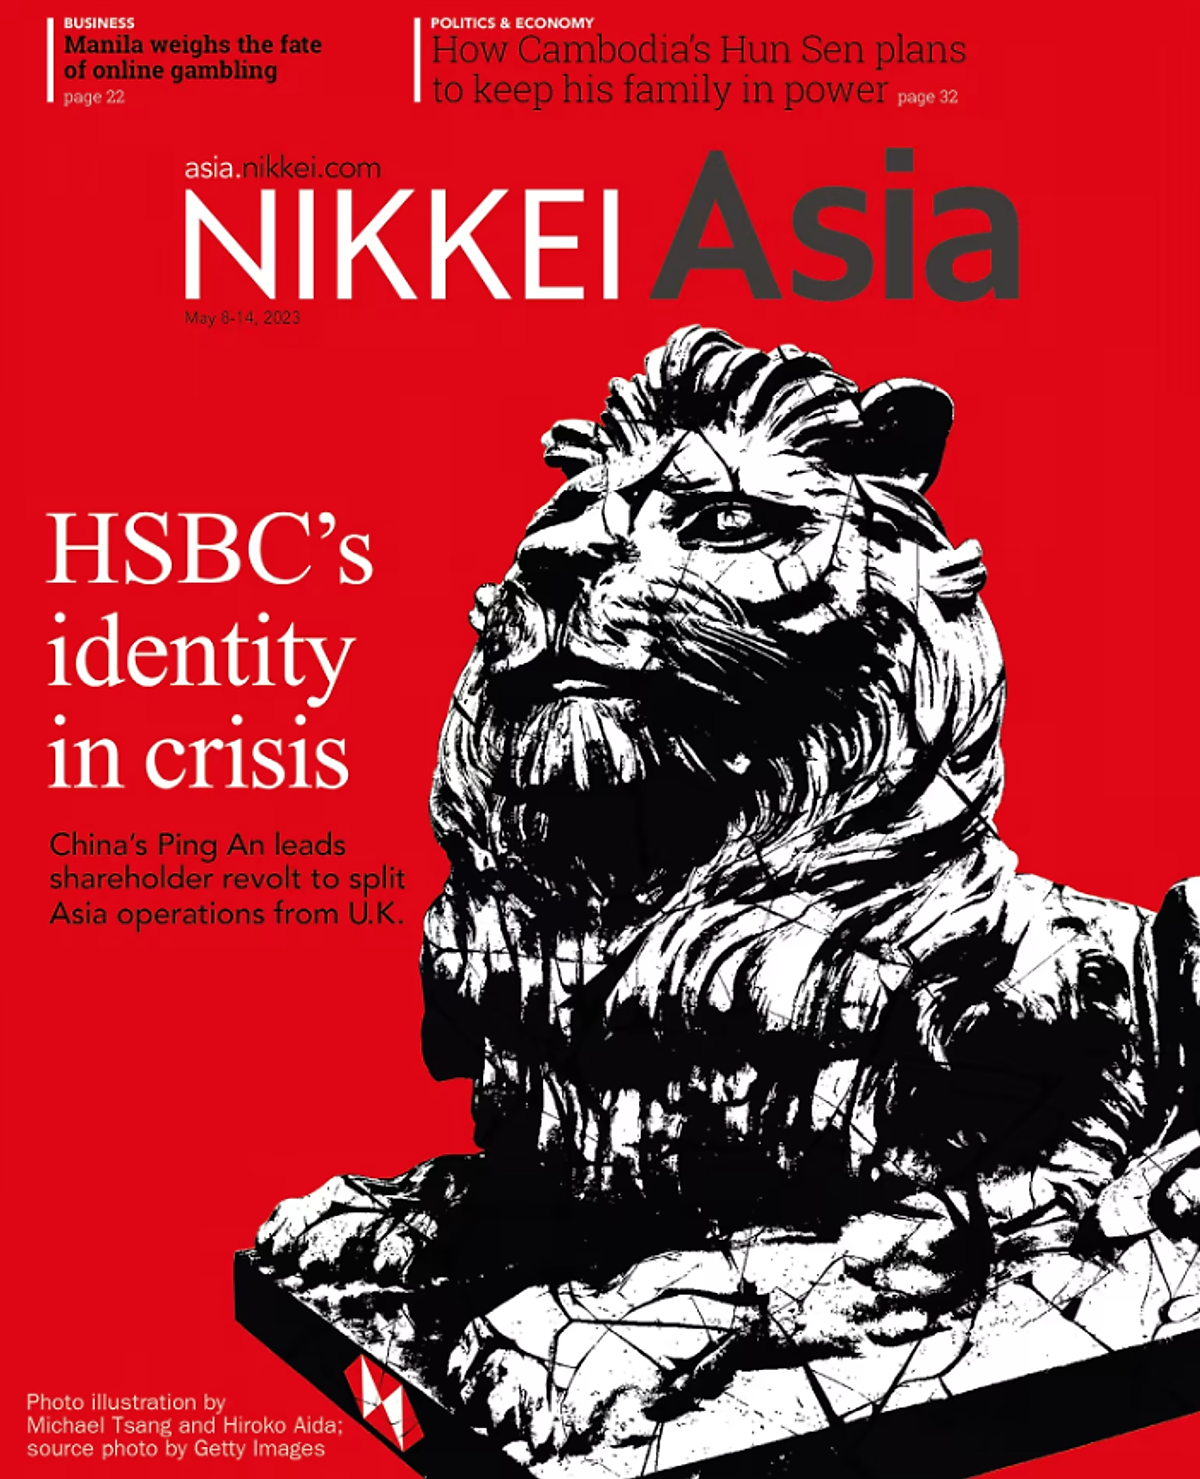 Tạp chí Tiếng Anh - Nikkei Asia 2023: kỳ 19: HSBC'S IDENTITY IN CRISIS